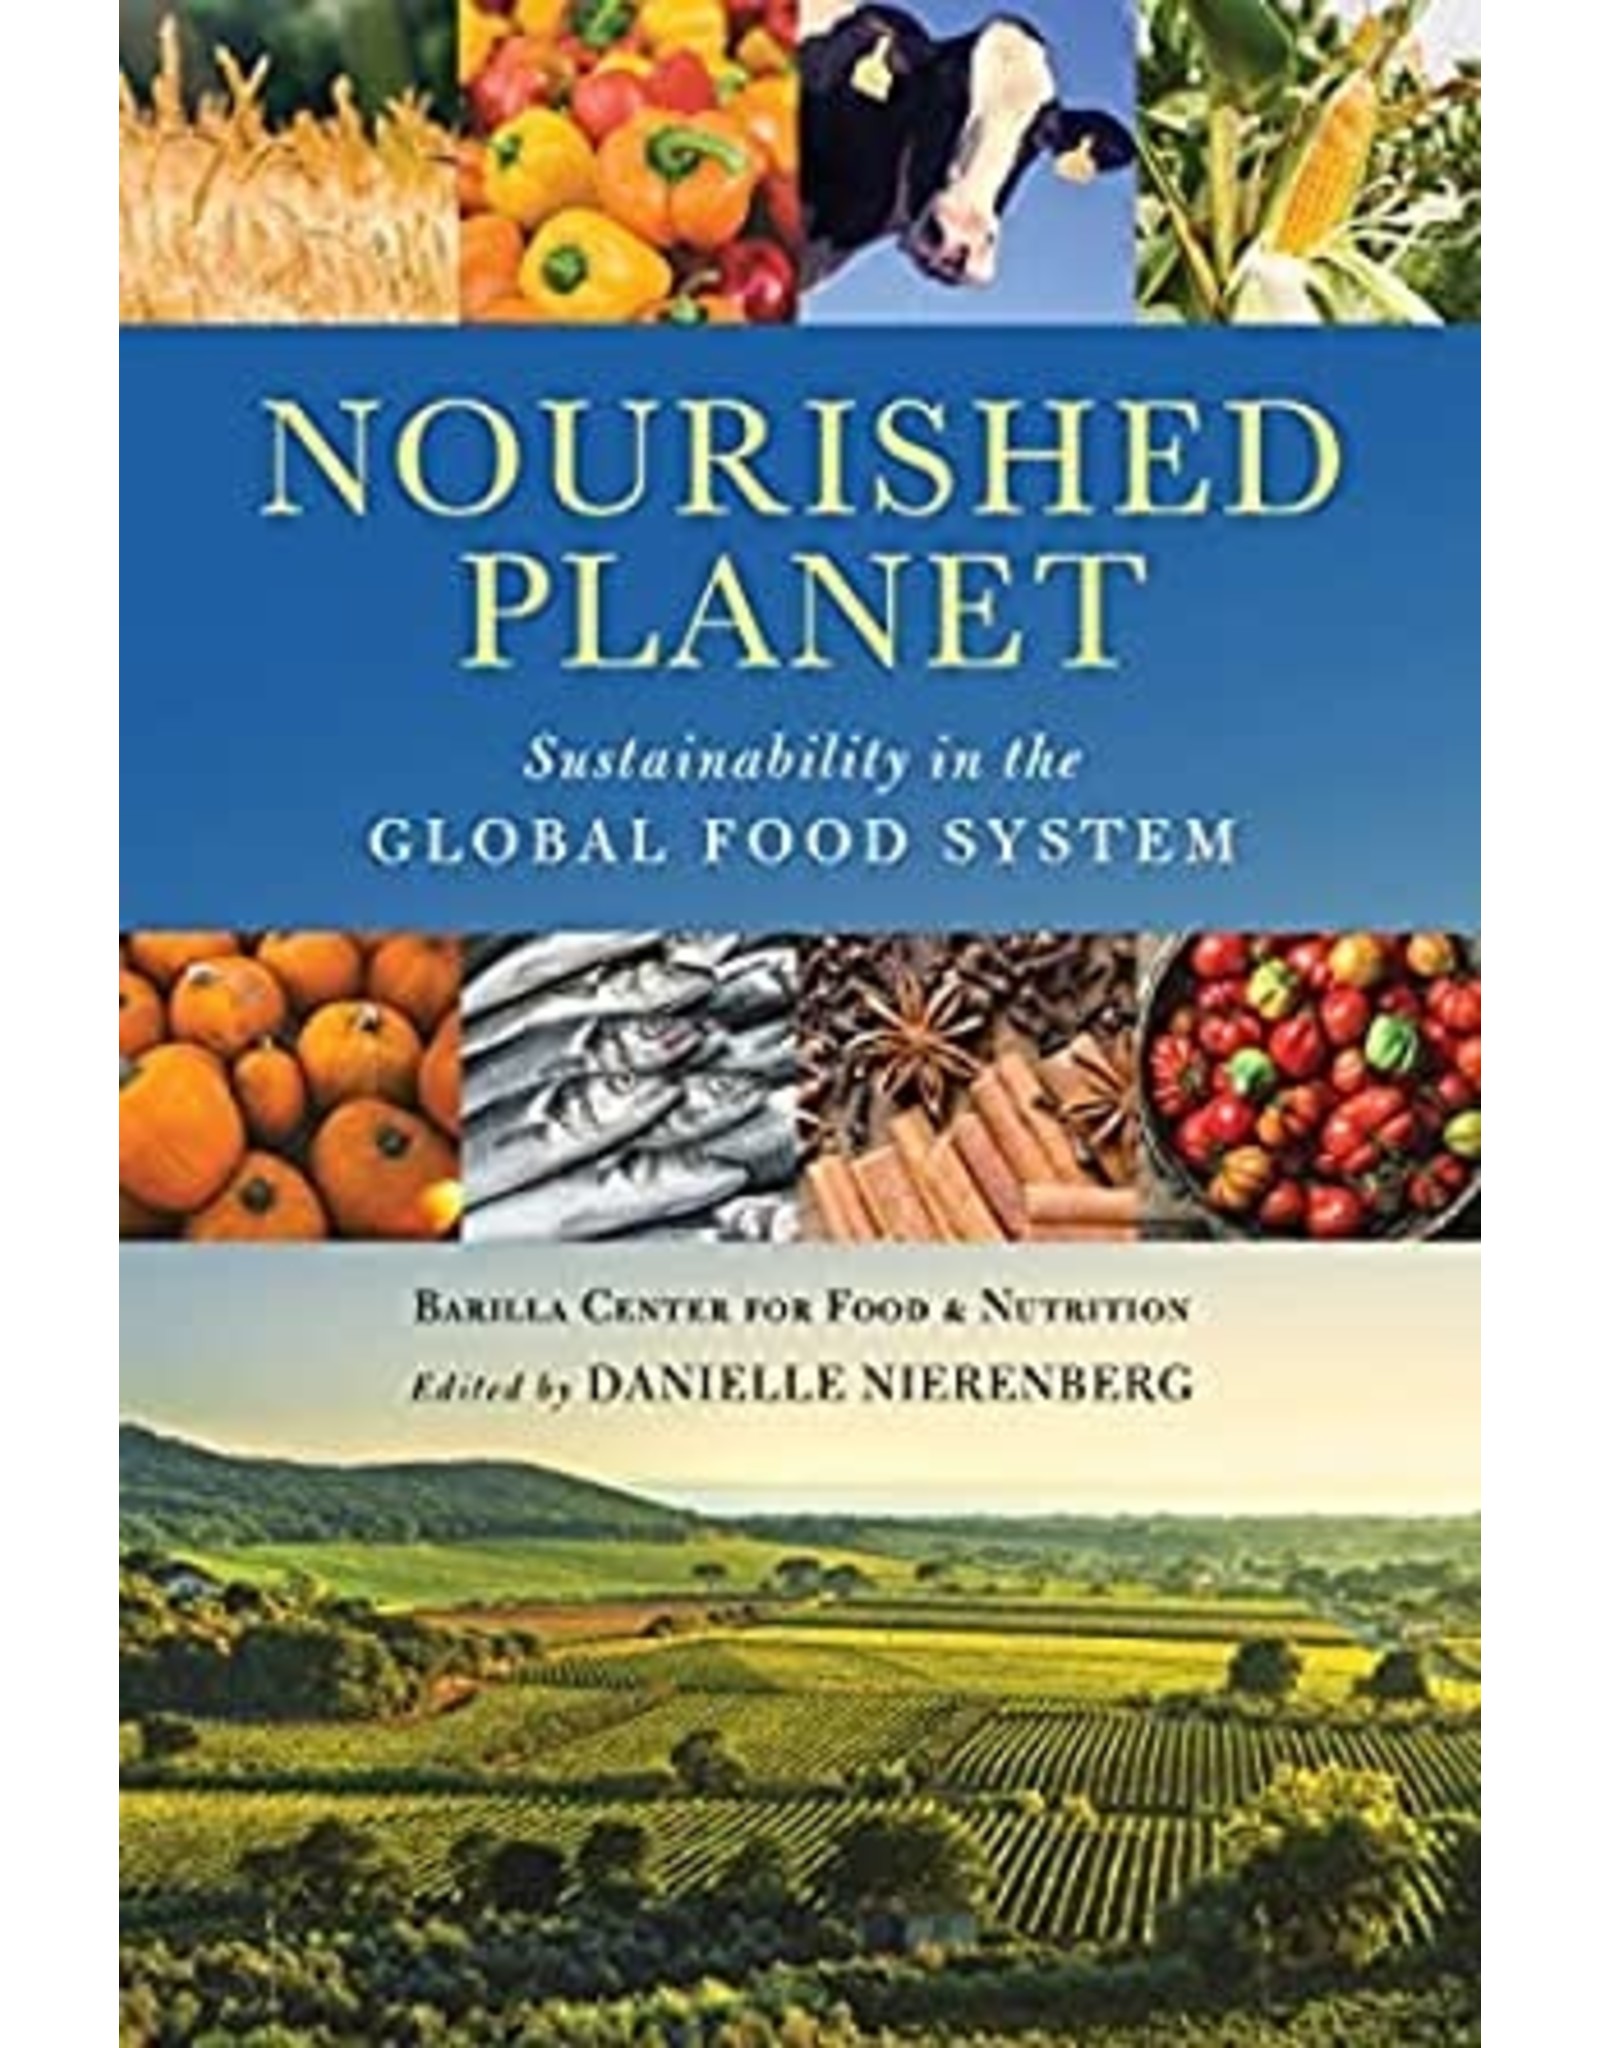 Textbook Nourished Planet: Sustainability in the Global Food System, 3rd Edition